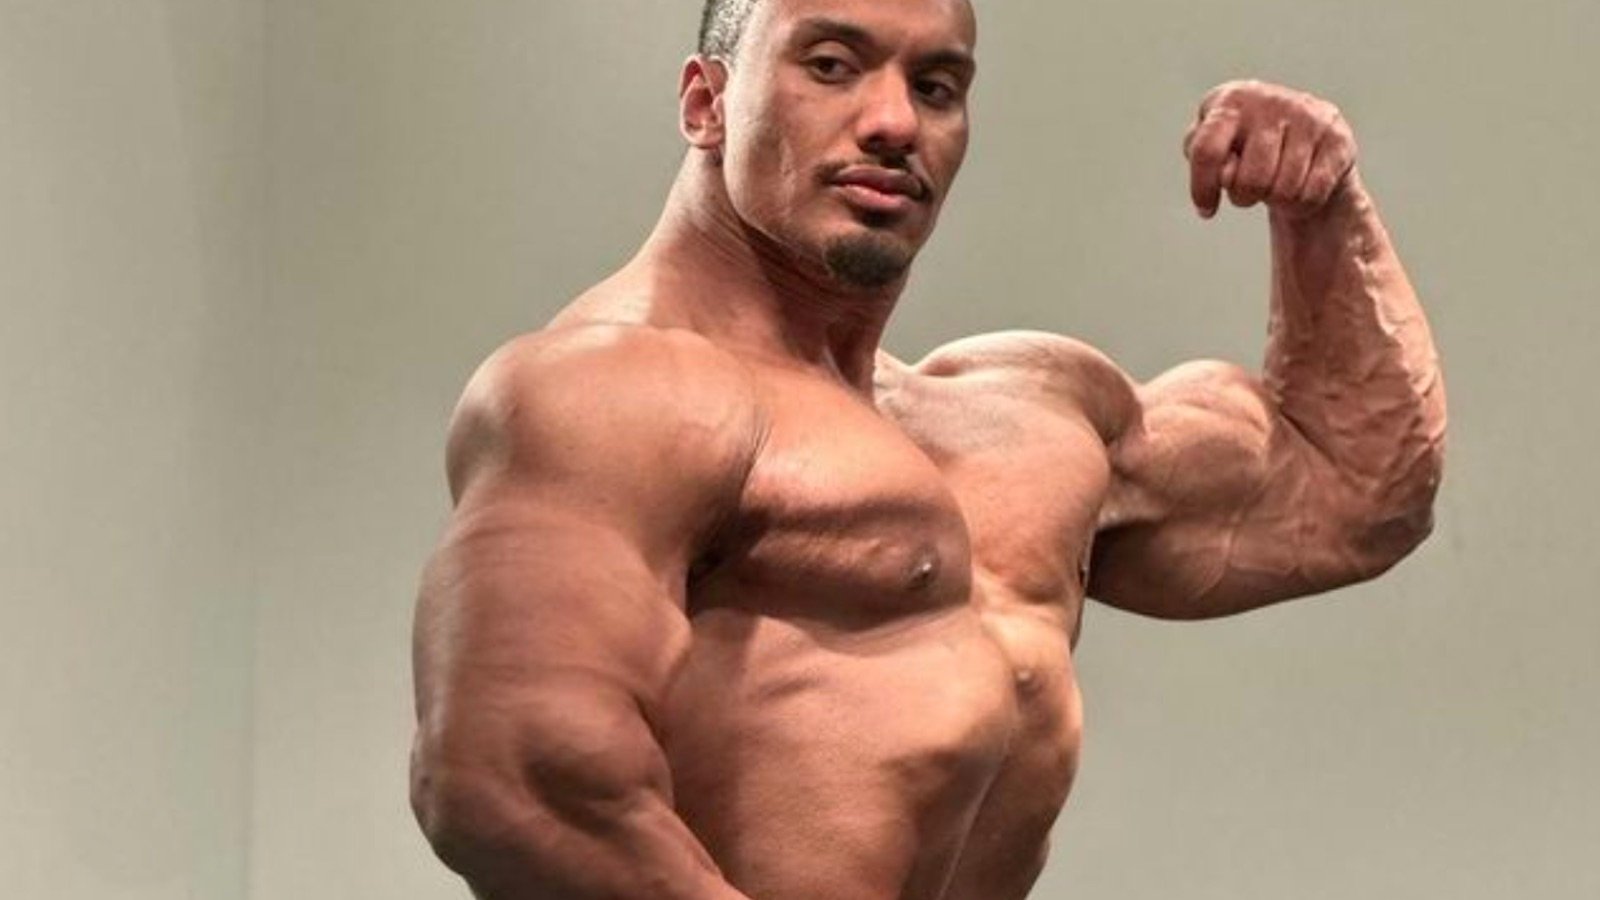 larry-wheels-will-compete-in-classic-physique-division-in-2023-–-breaking-muscle